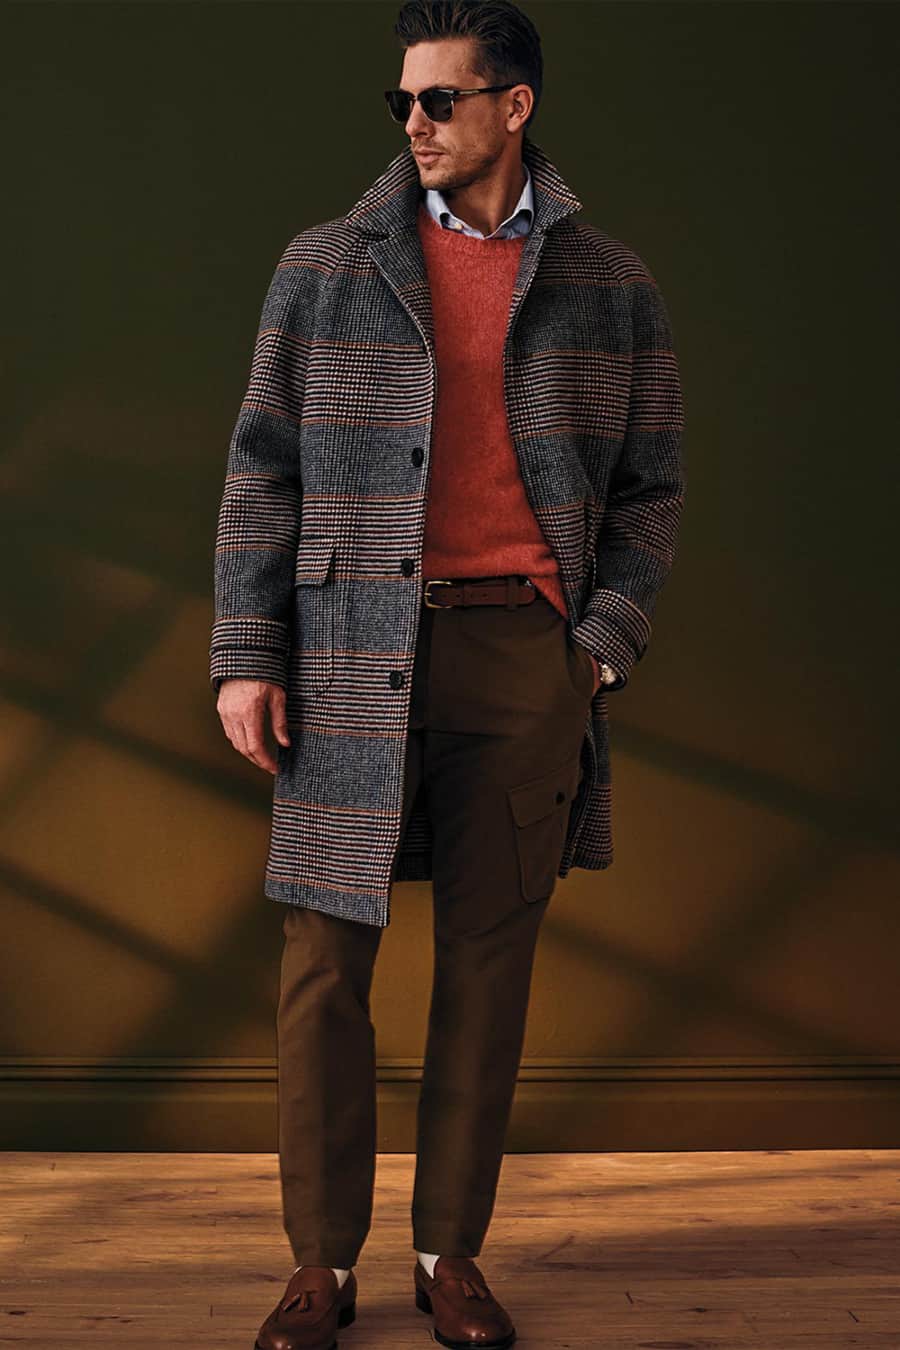 Men's brown cargo pants, blue oxford shirt, red sweater, checked overcoat and brown leather loafers outfit